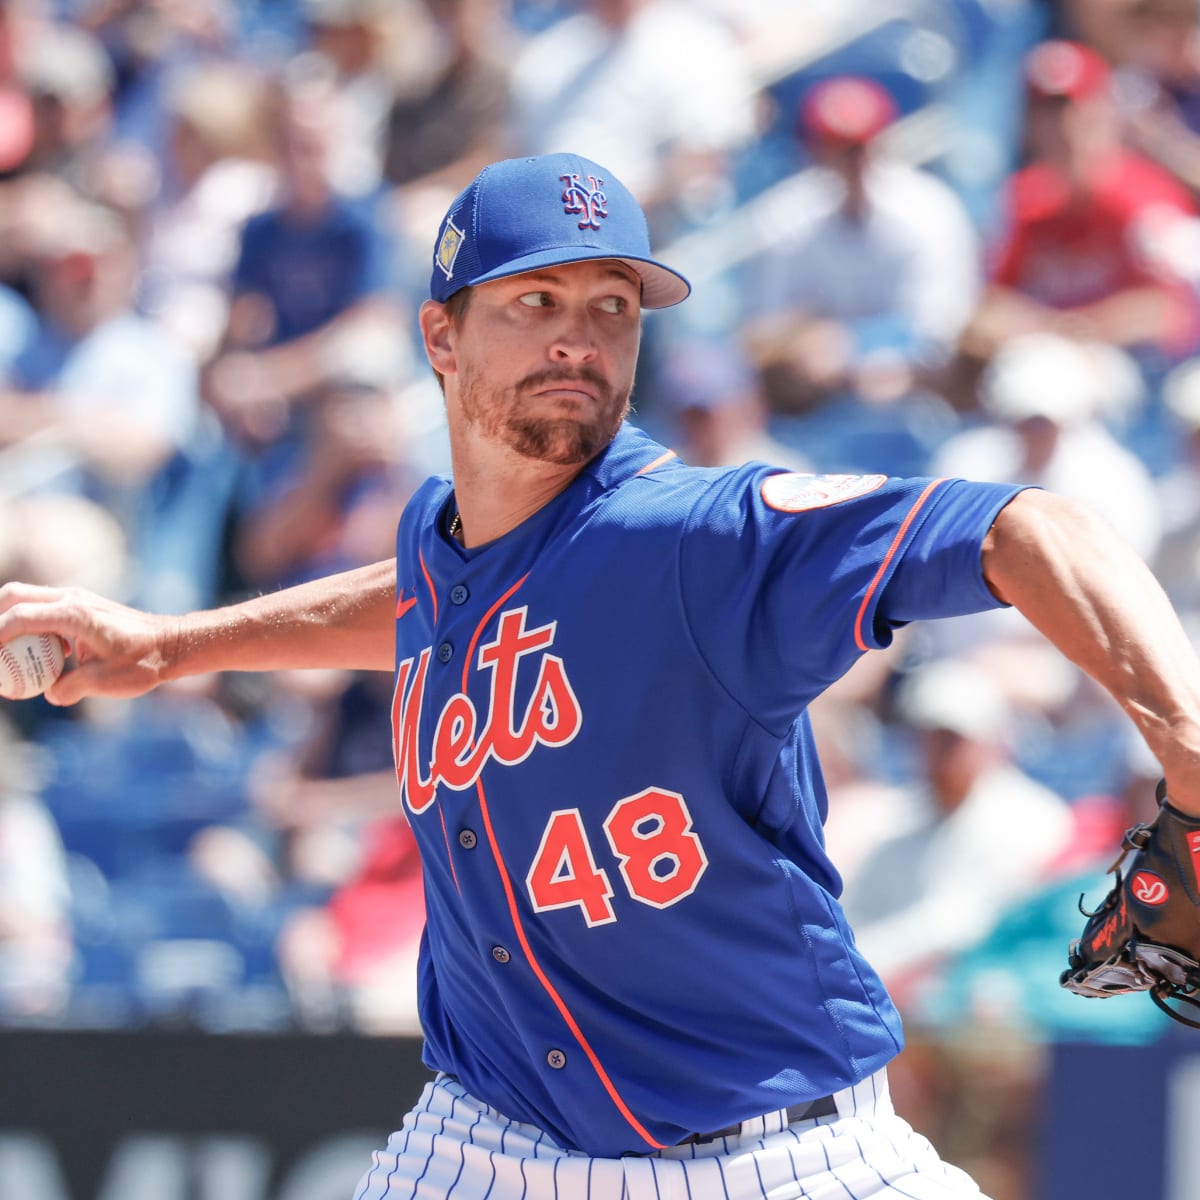 Jacob deGrom to have another rehab start, won't face Yankees - Newsday